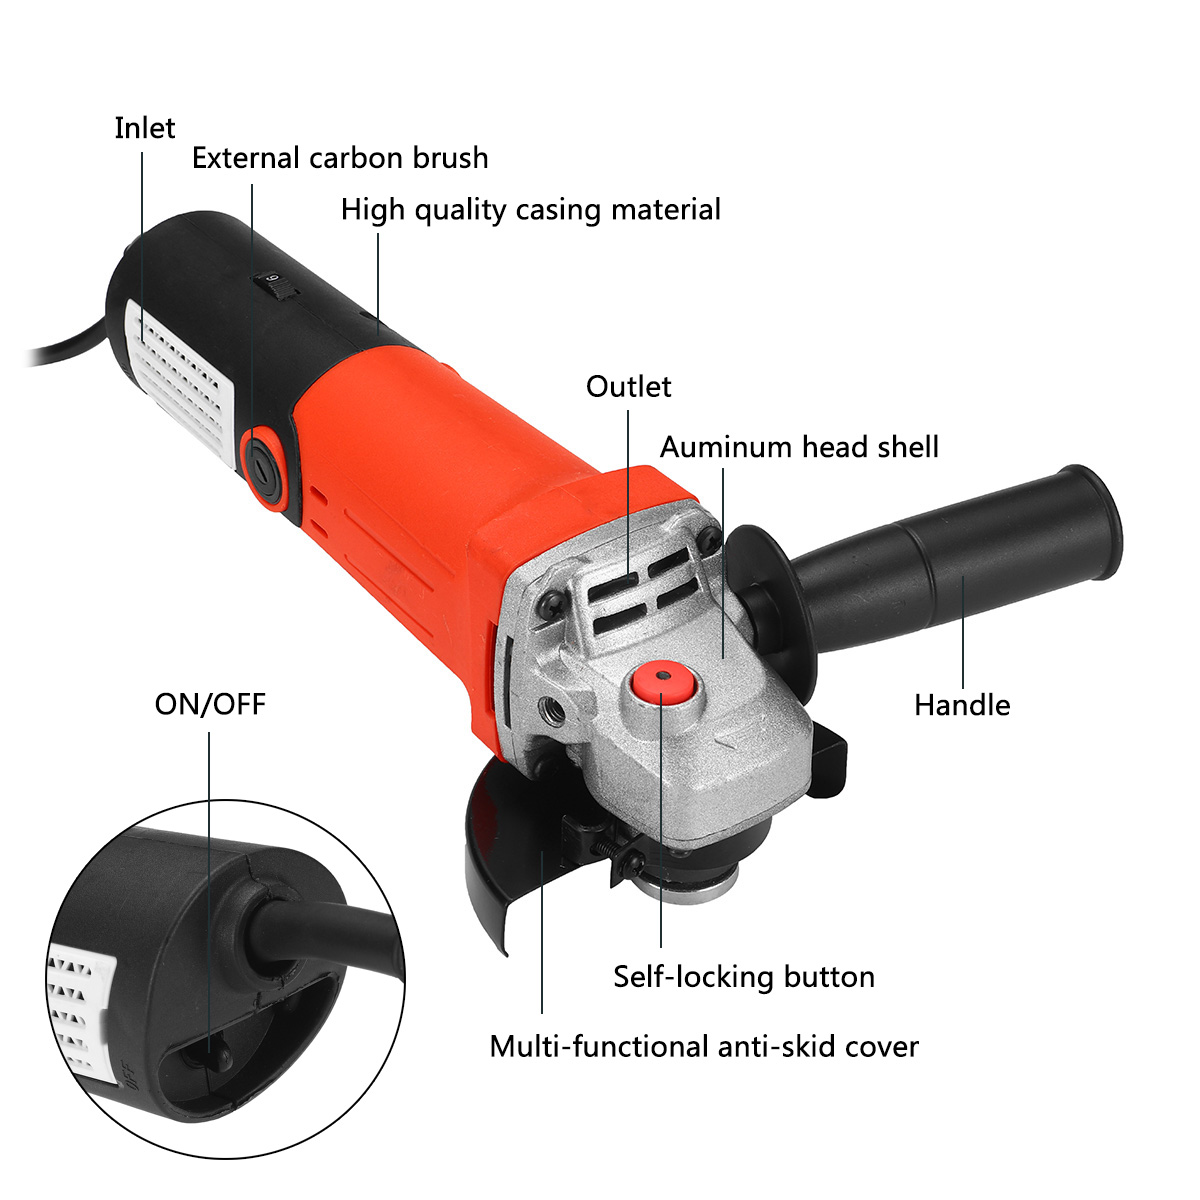 1100W-11000rmin-Electric-Angle-Grinder-Grinding-Machine-Woodworking-Tool-1824584-11